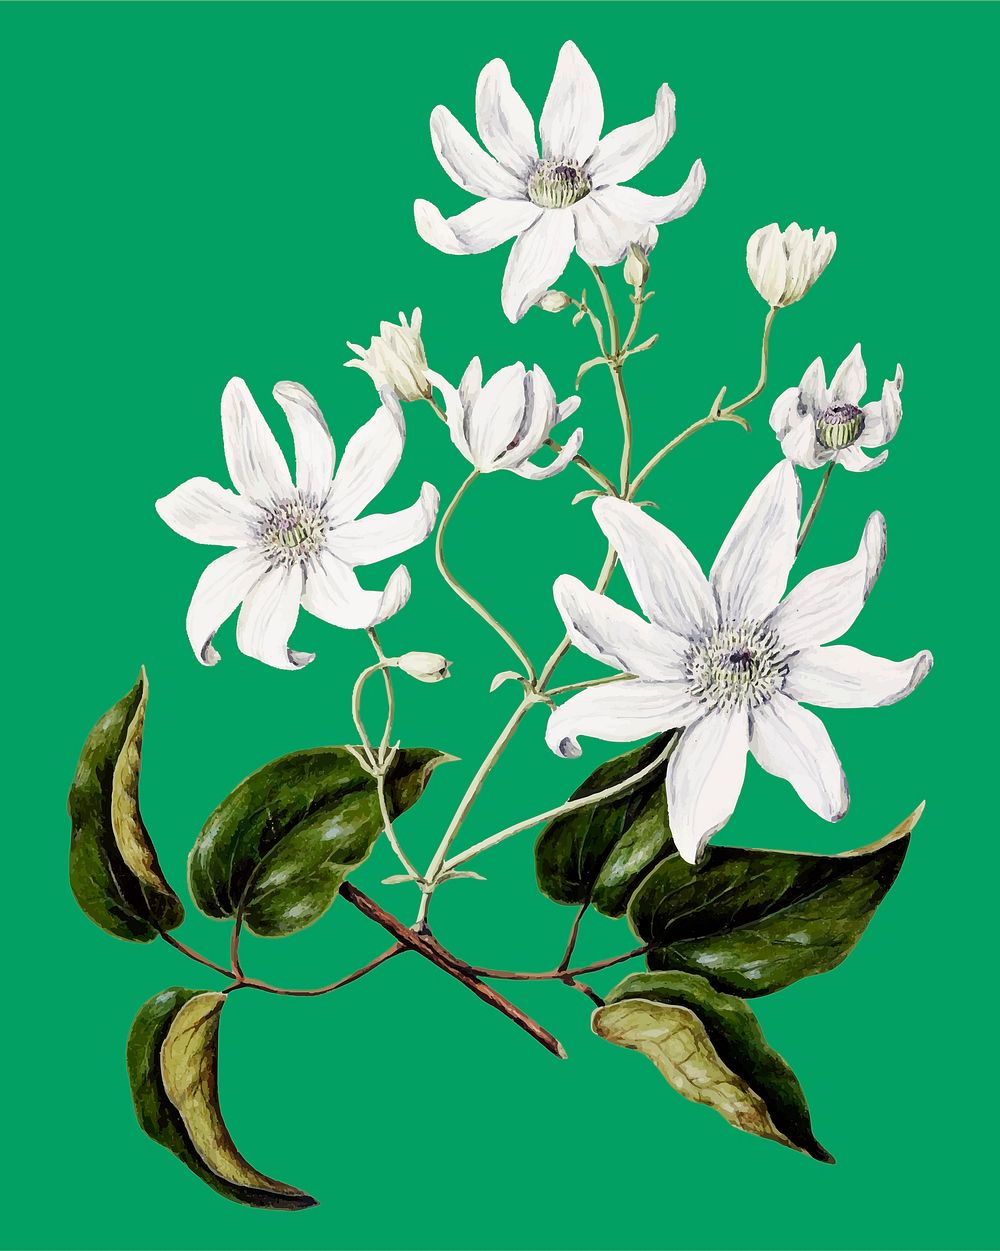 White clematis flower sticker, vintage botanical illustration vector, remix from the artwork of Sarah Featon